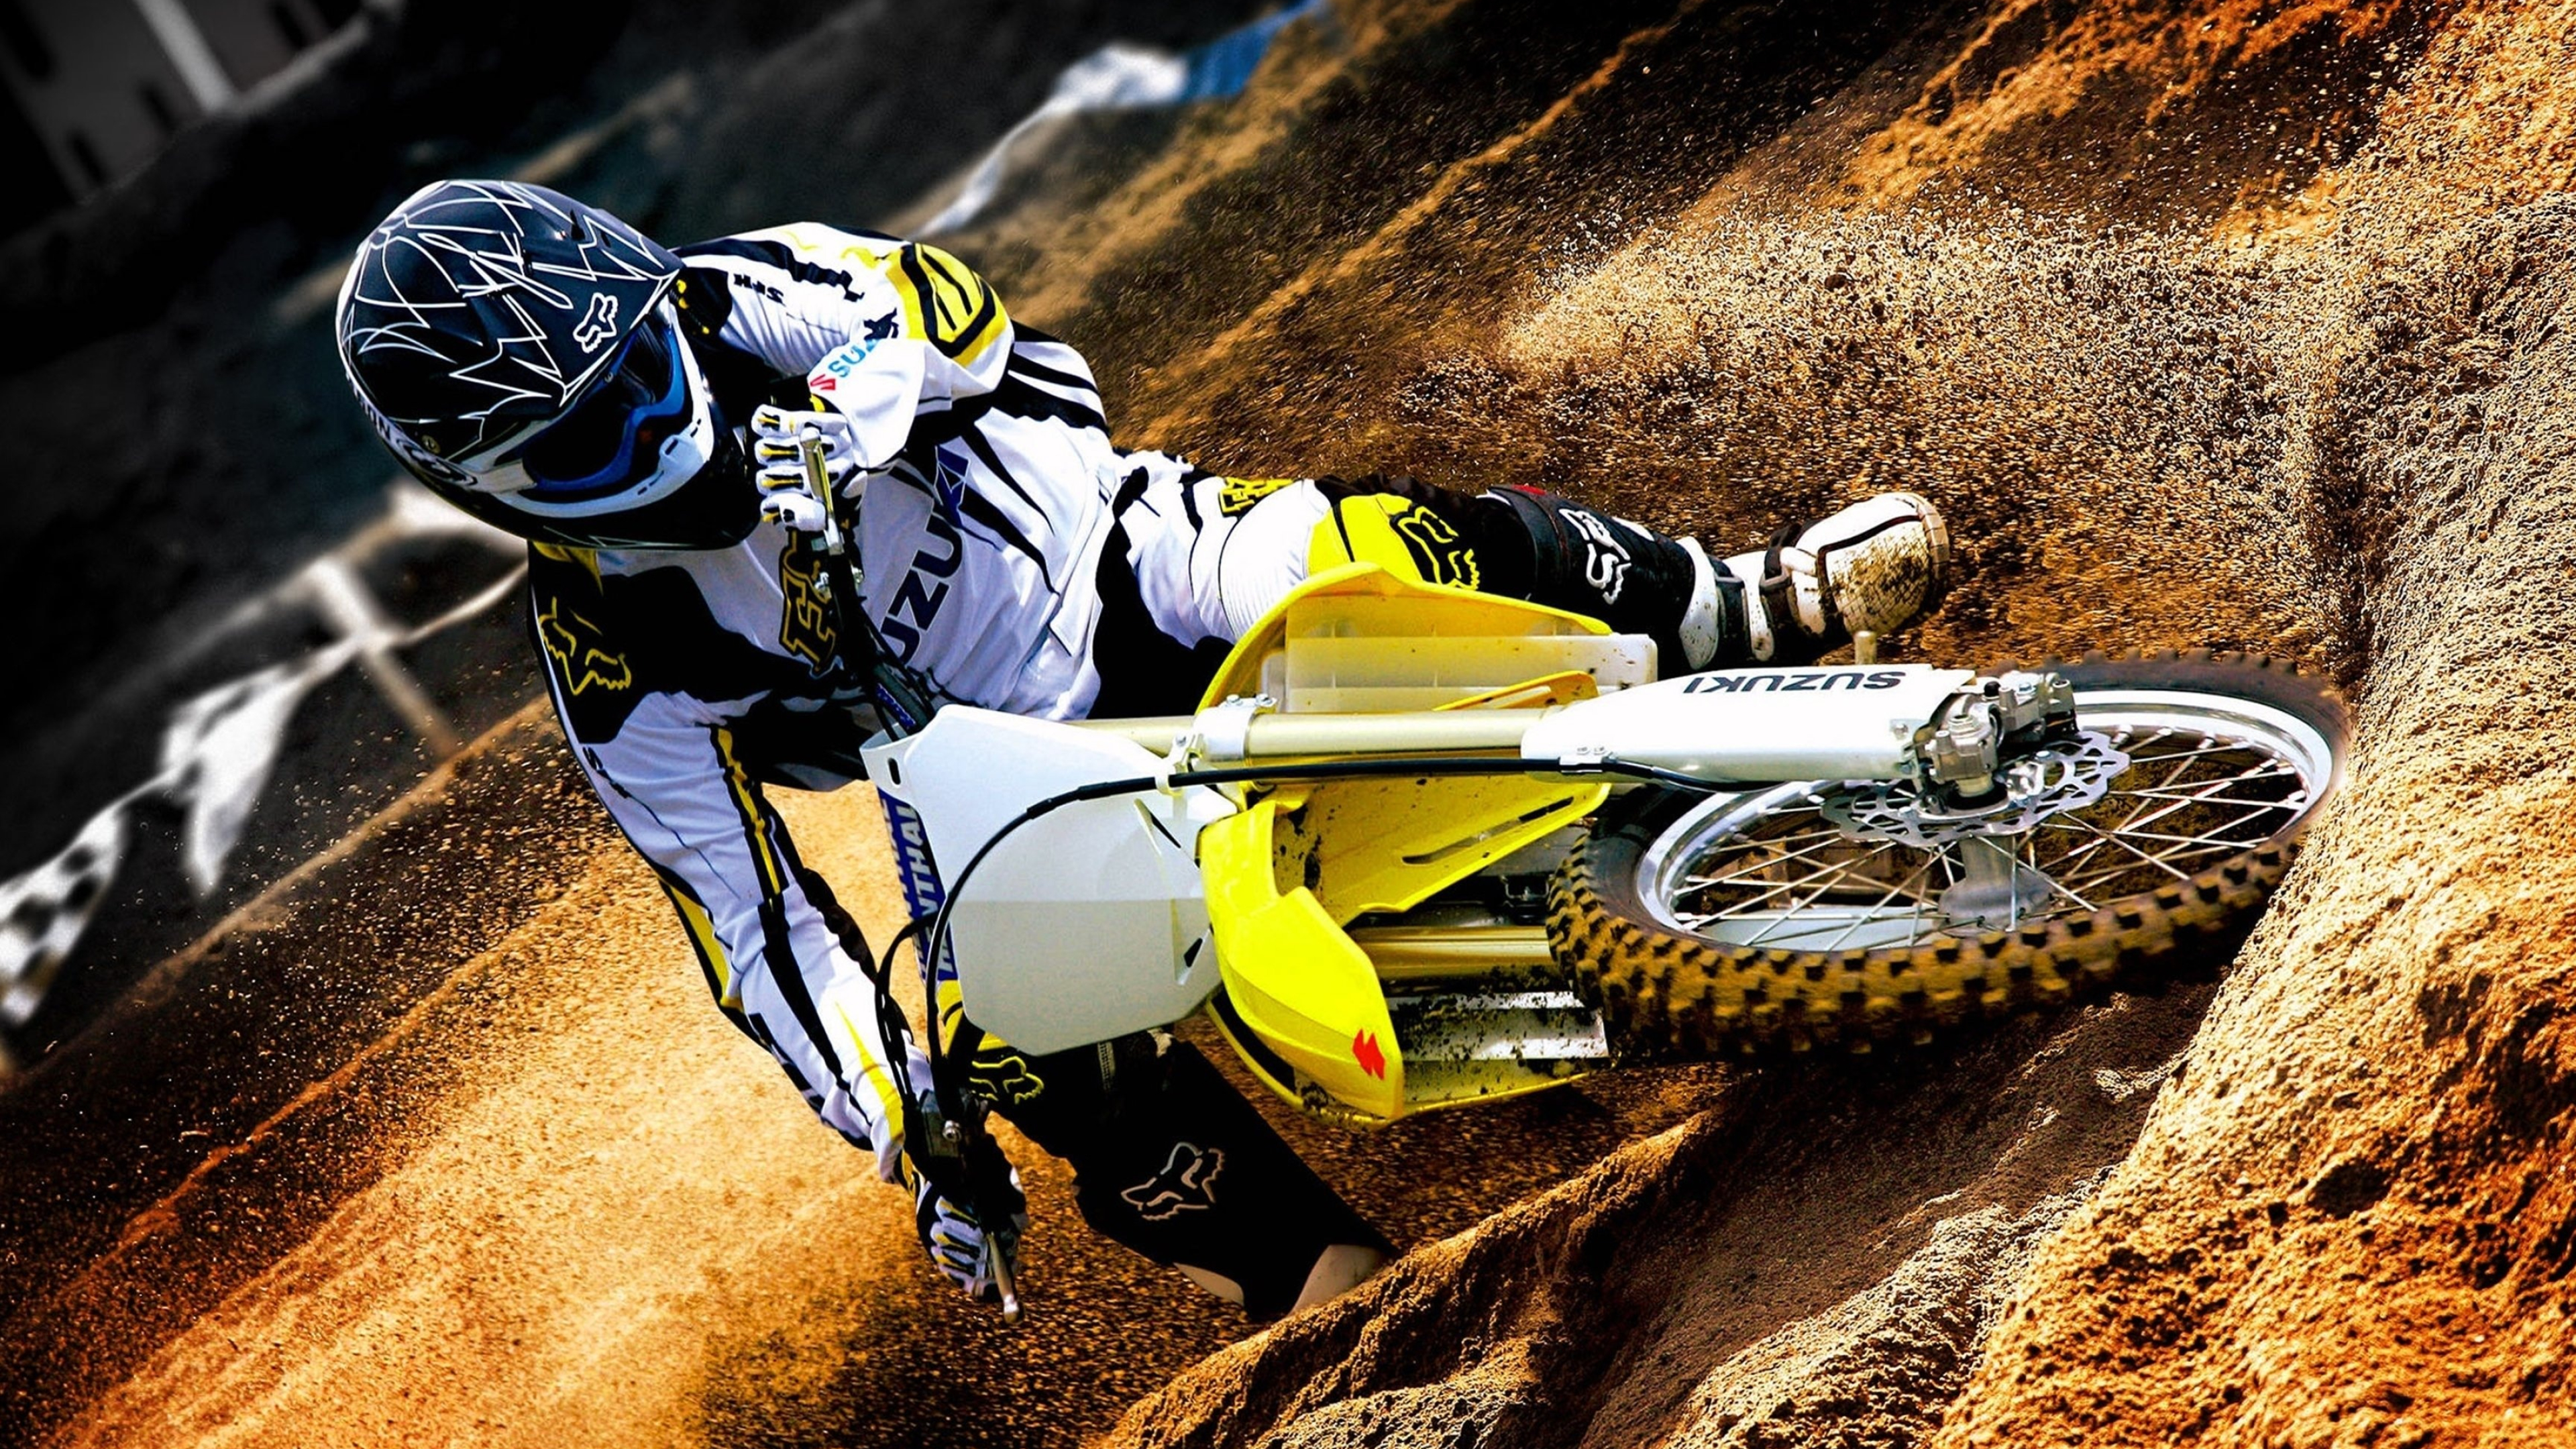 Motocross: Motorcycles Extreme Speed Challenge, Fourth of July Sports Event, Suzuki Rider, Race 2022. 3840x2160 4K Background.